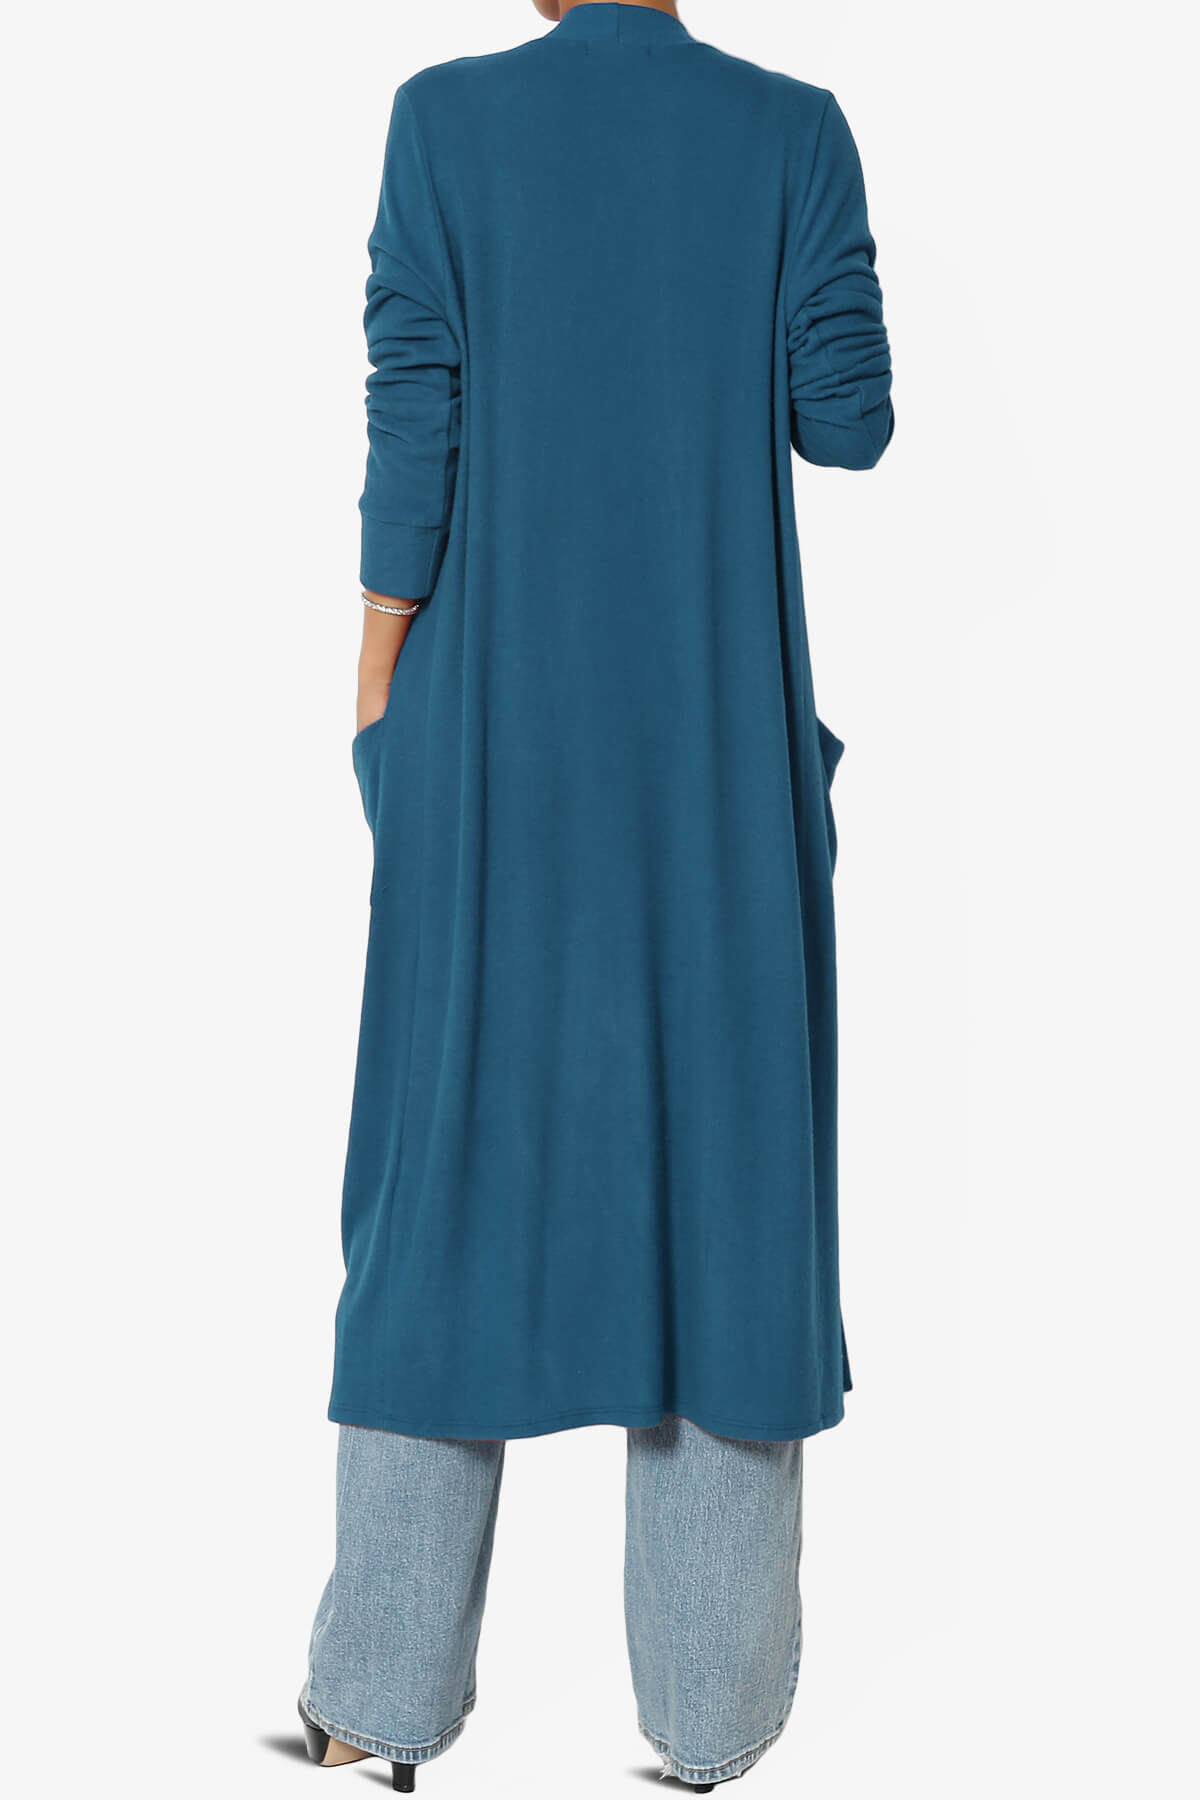 Load image into Gallery viewer, Noelle Extra Long Duster Knit Cardigan TEAL_2
